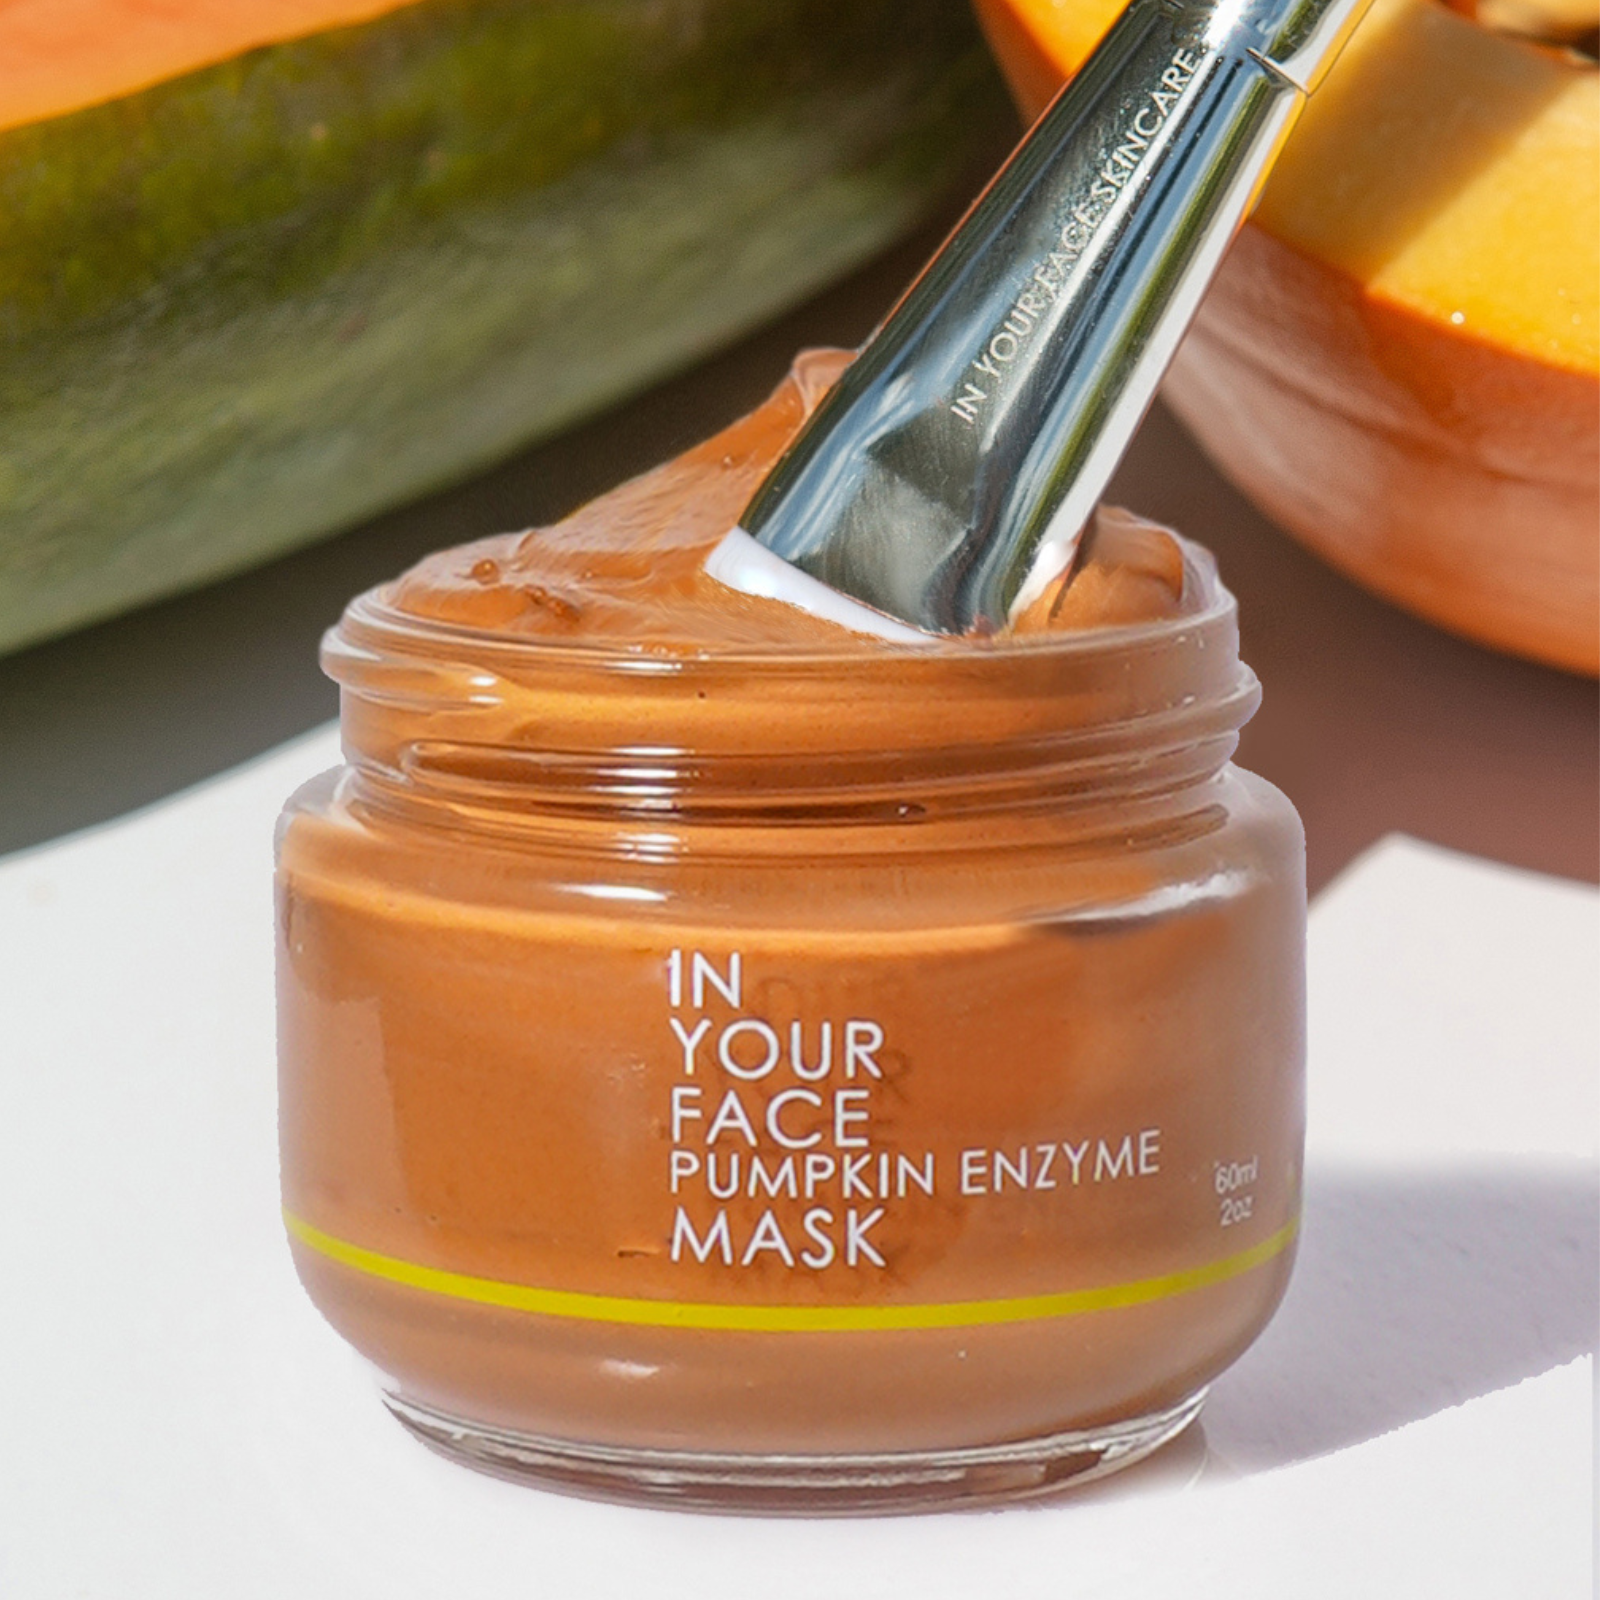 a picture of the PUMPKIN ENZYME MASK open with a MASK BRUSH inside.